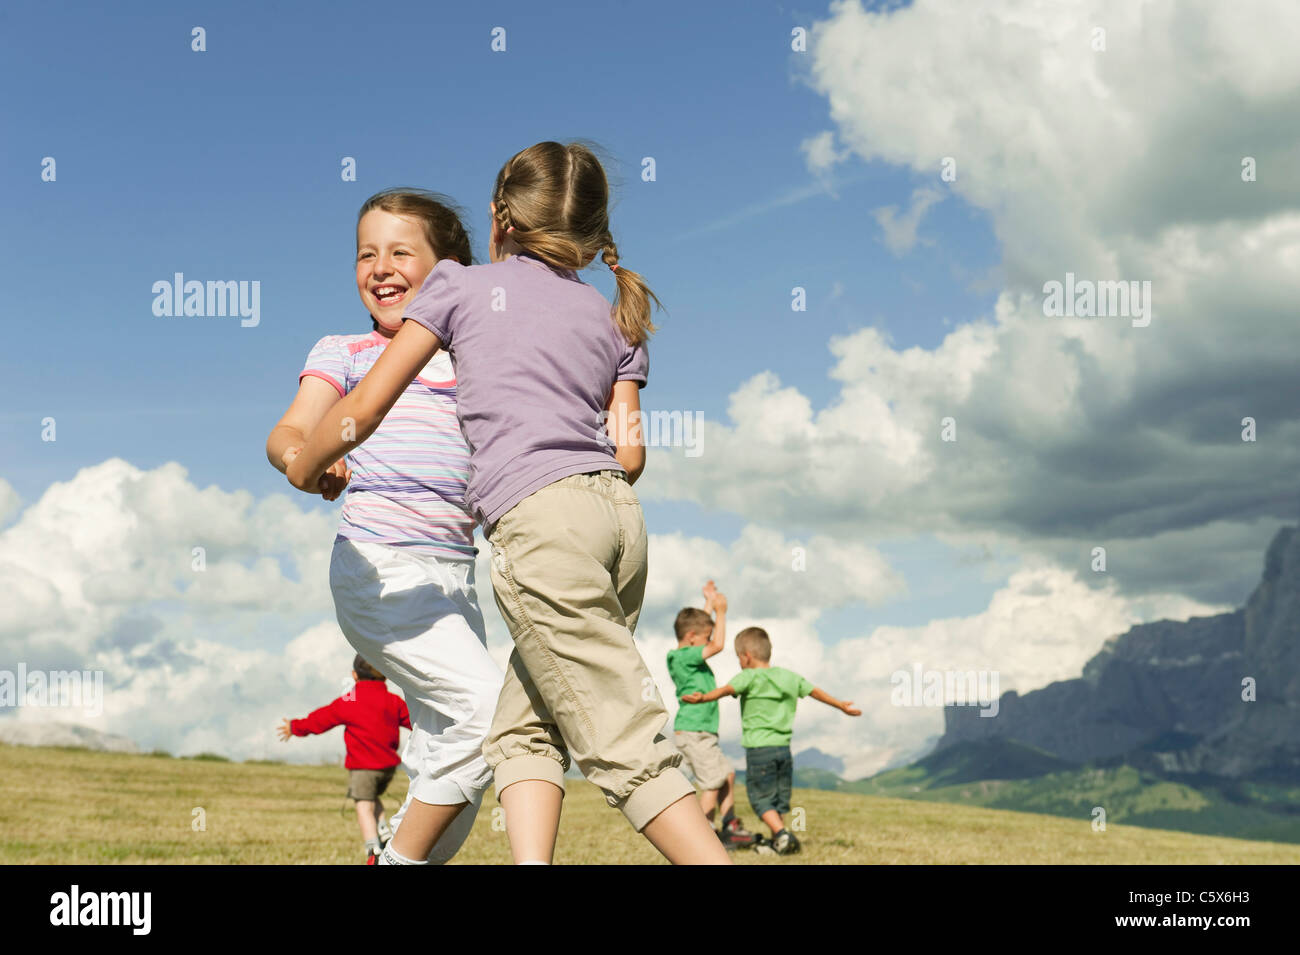 Italy, Seiseralm, Children (6-7), (8-9), (4-5) playing in meadow Stock Photo